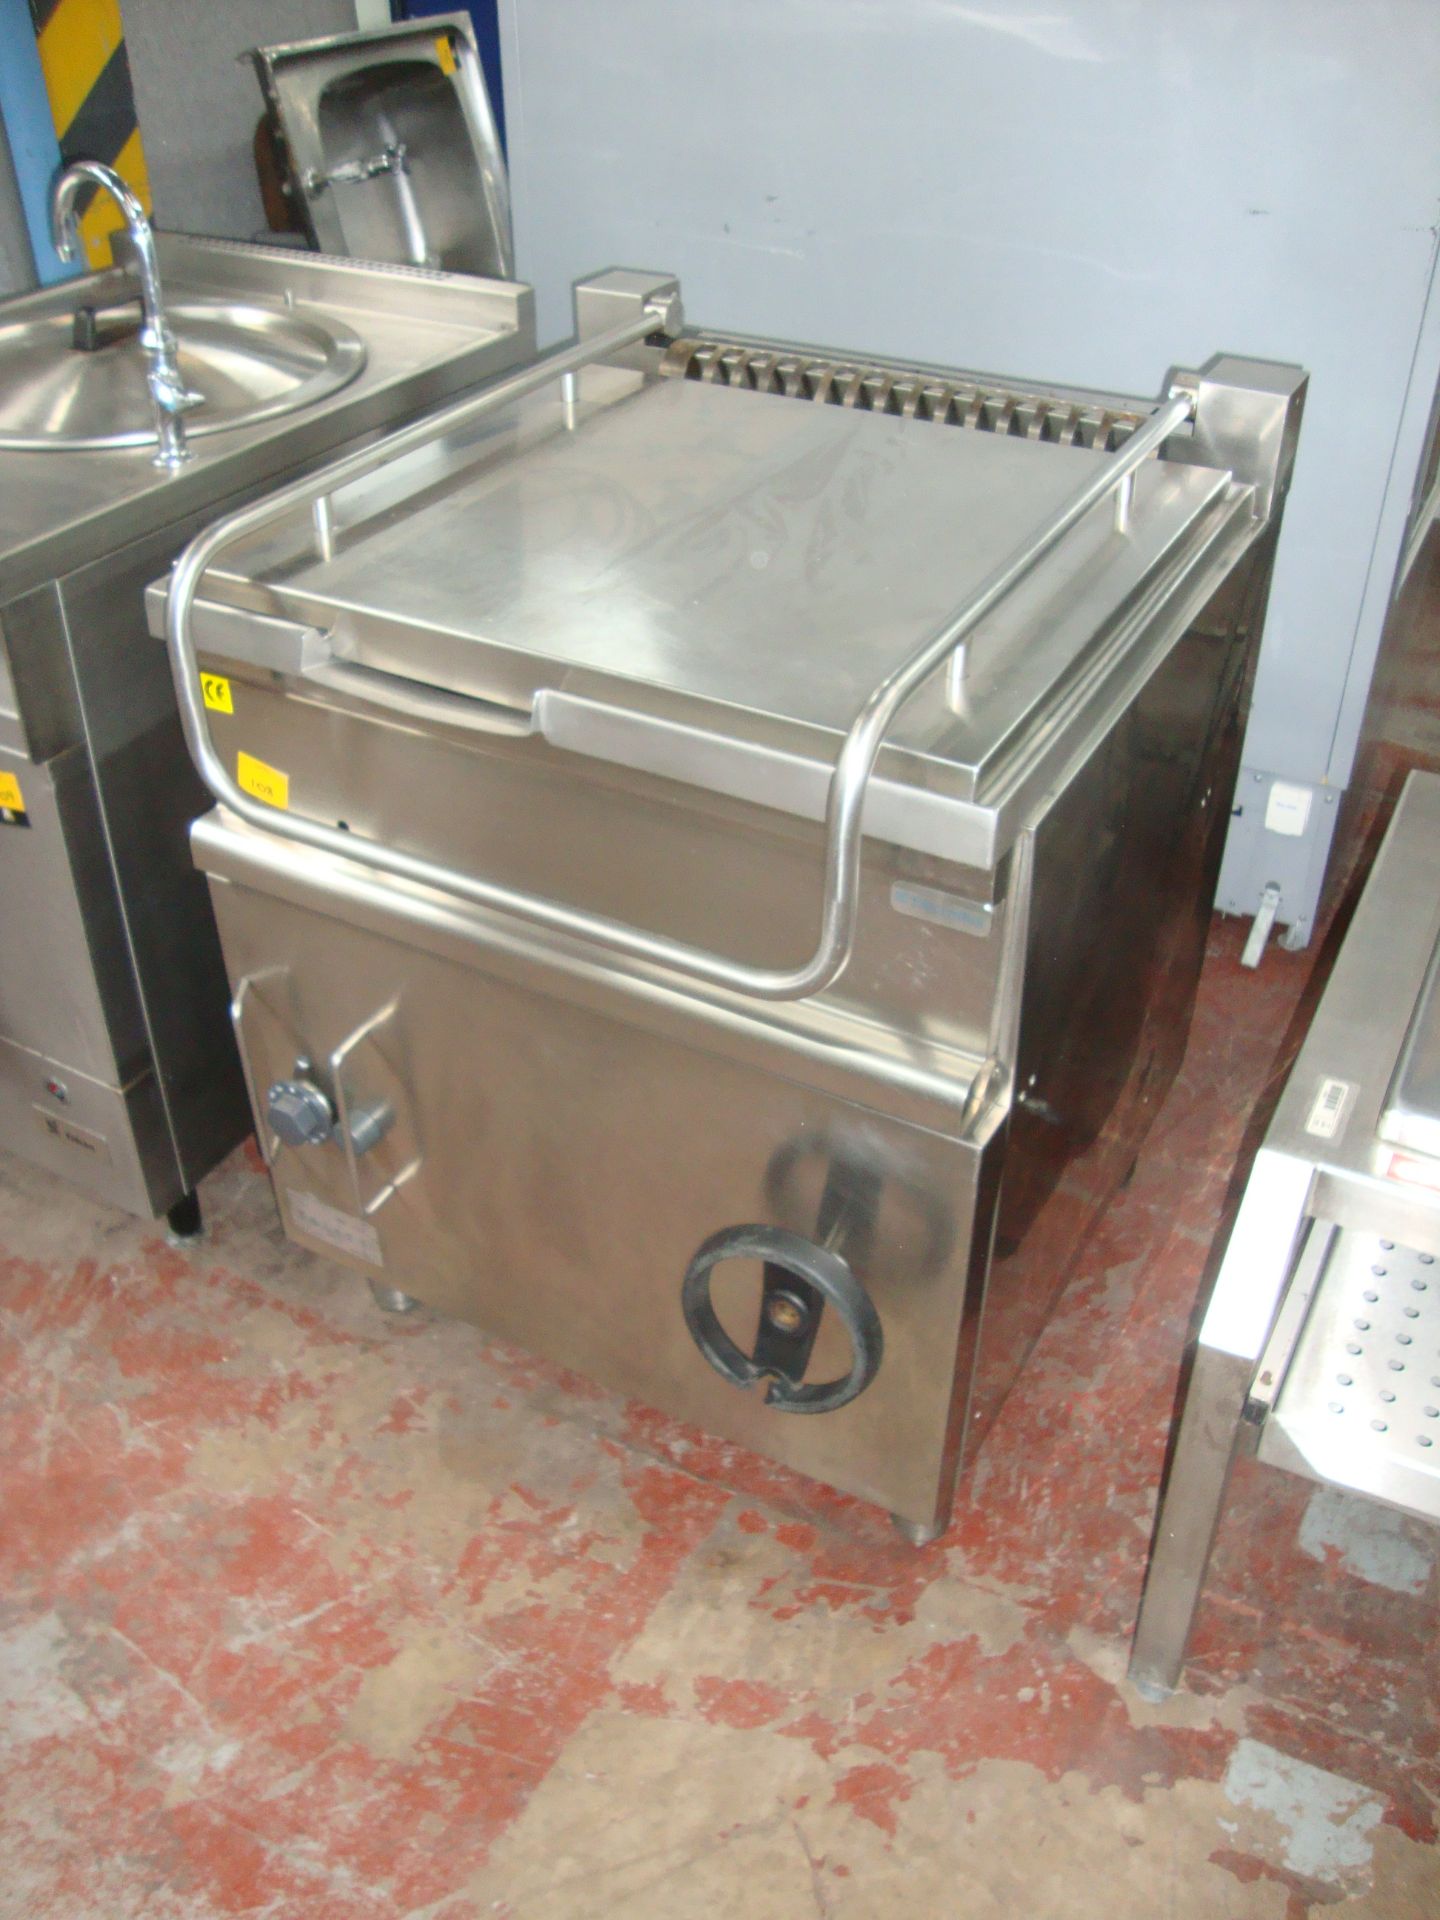 Electrolux large stainless steel bratt panIMPORTANT: Please remember goods successfully bid upon